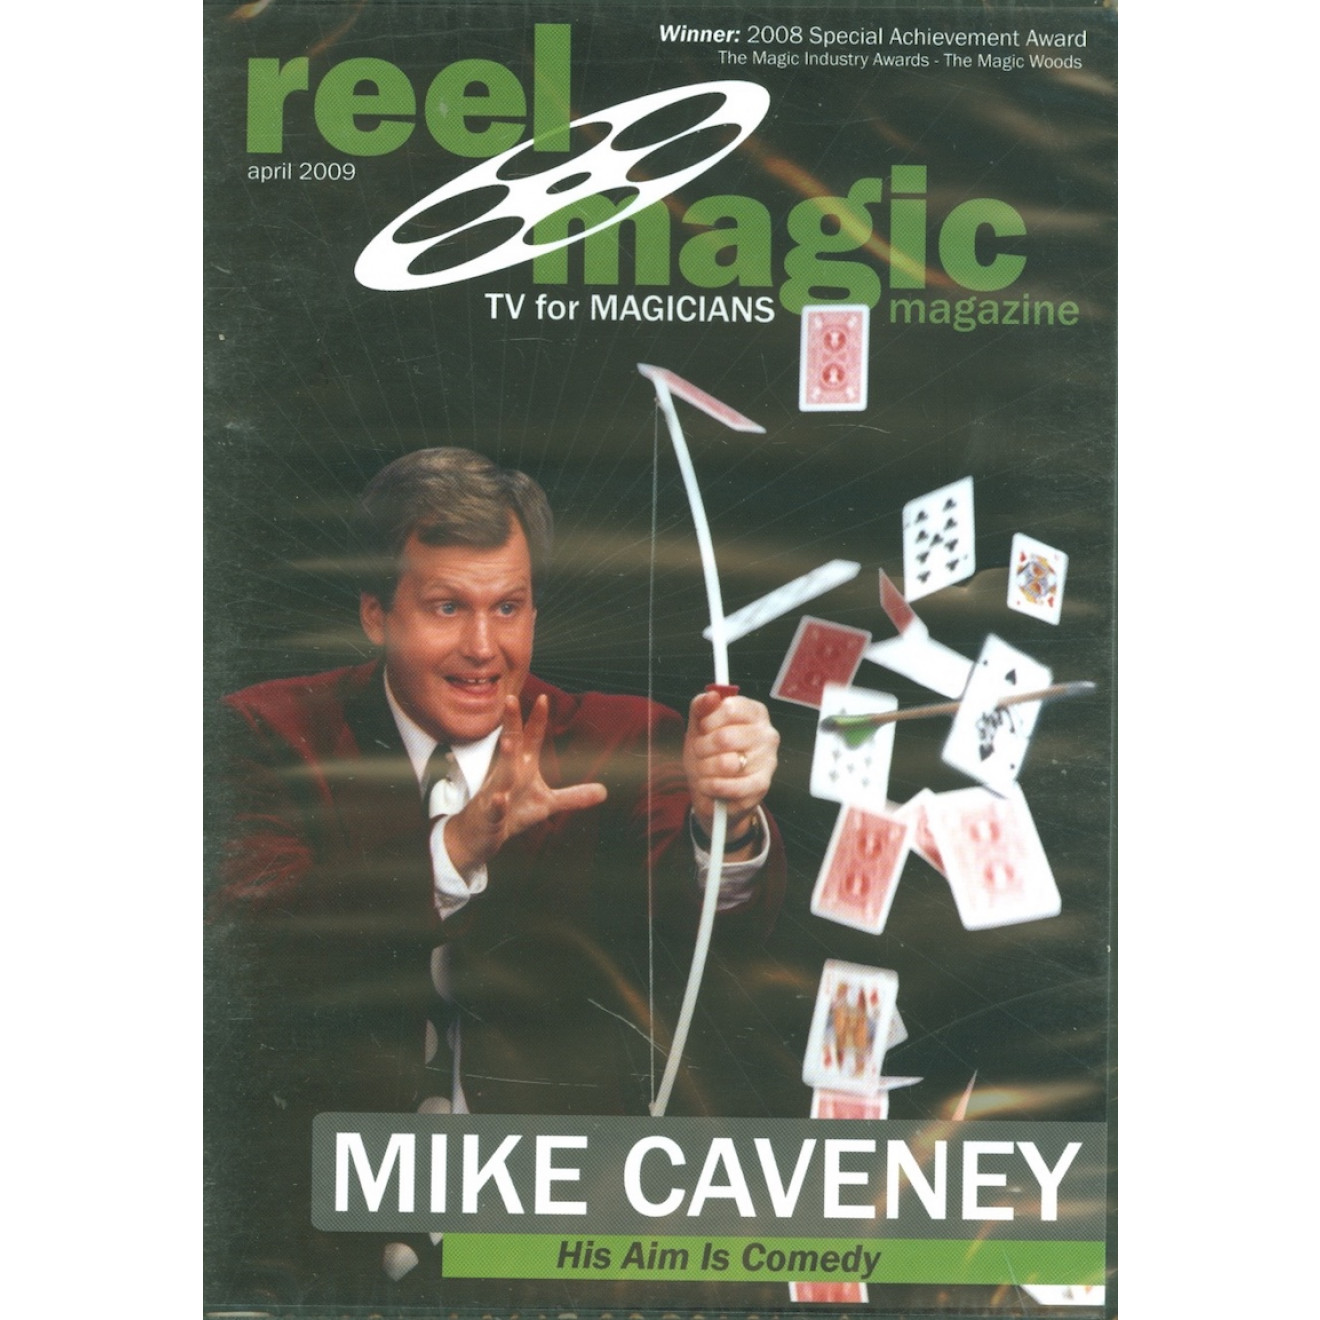 Reel Magic Issue 10 - Mike Caneney